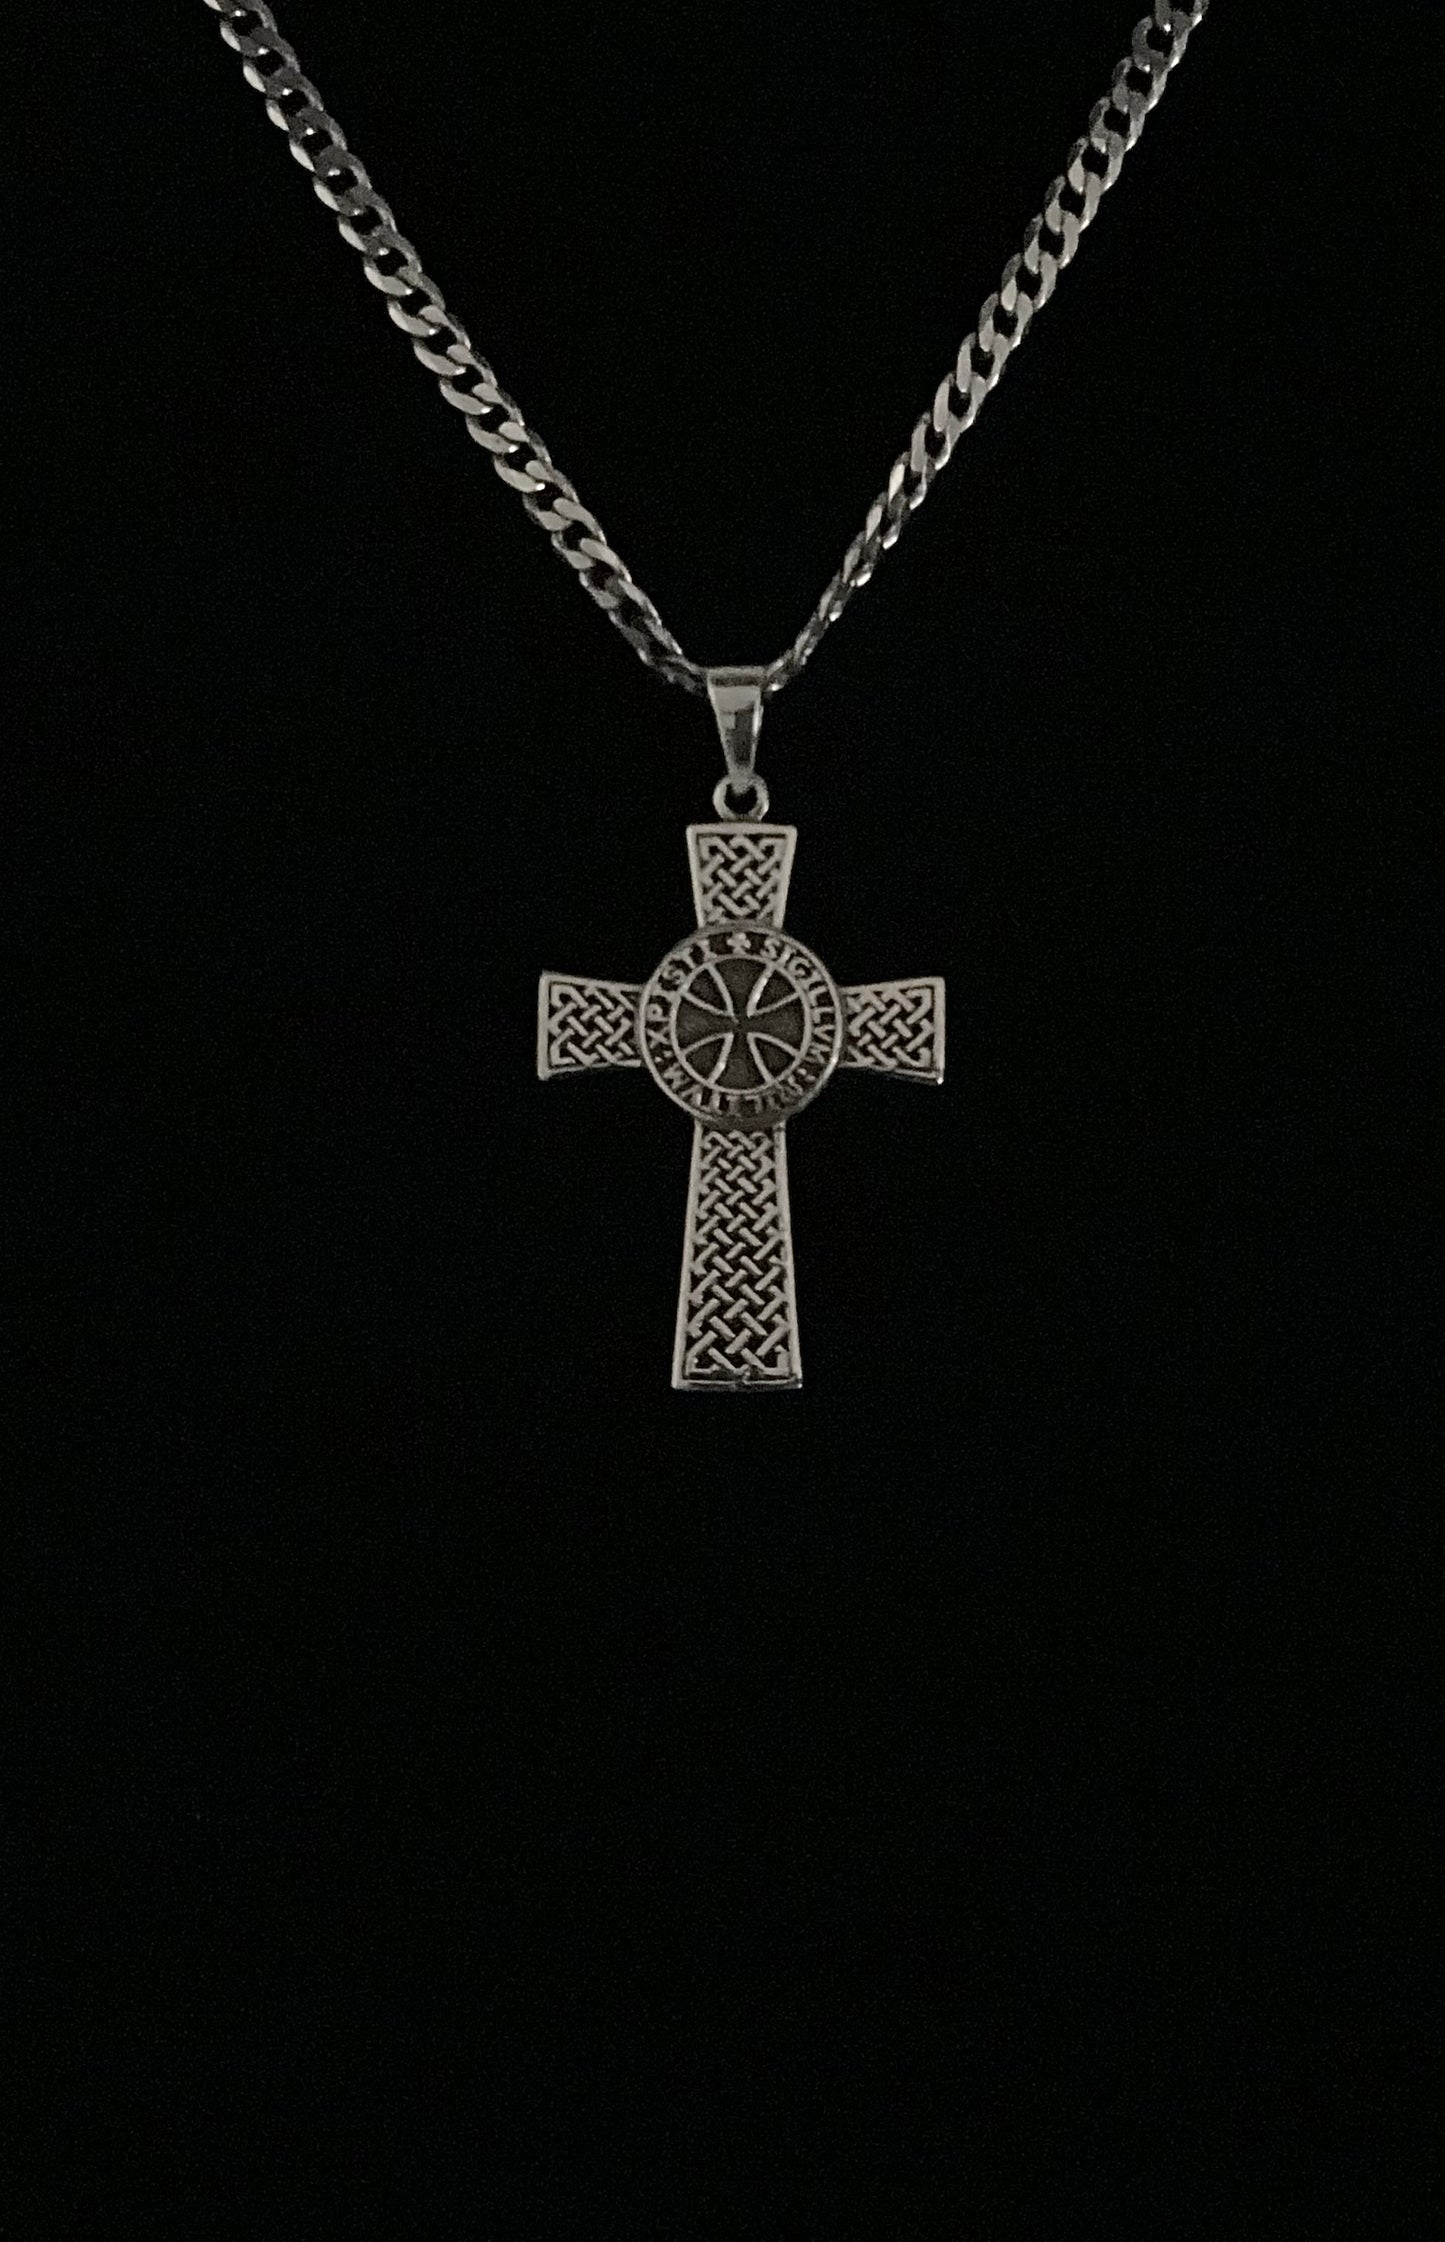 Large Handcast 925 Sterling Silver Crusader Knights Templar Cross Pendant + Free Chain Necklace